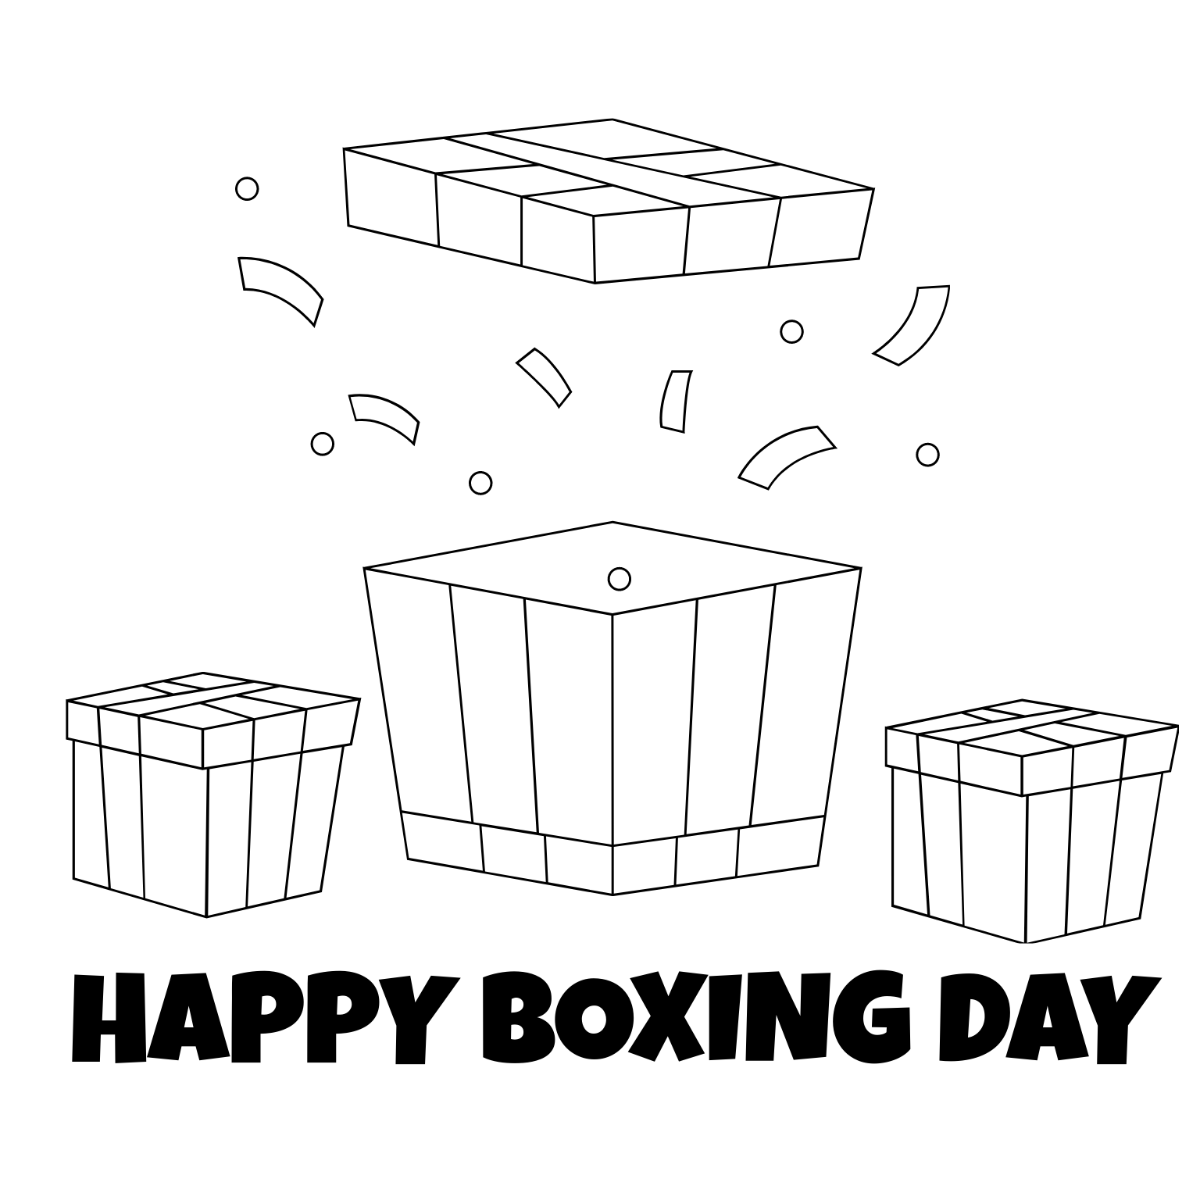 Free Boxing Day Image Drawing Template